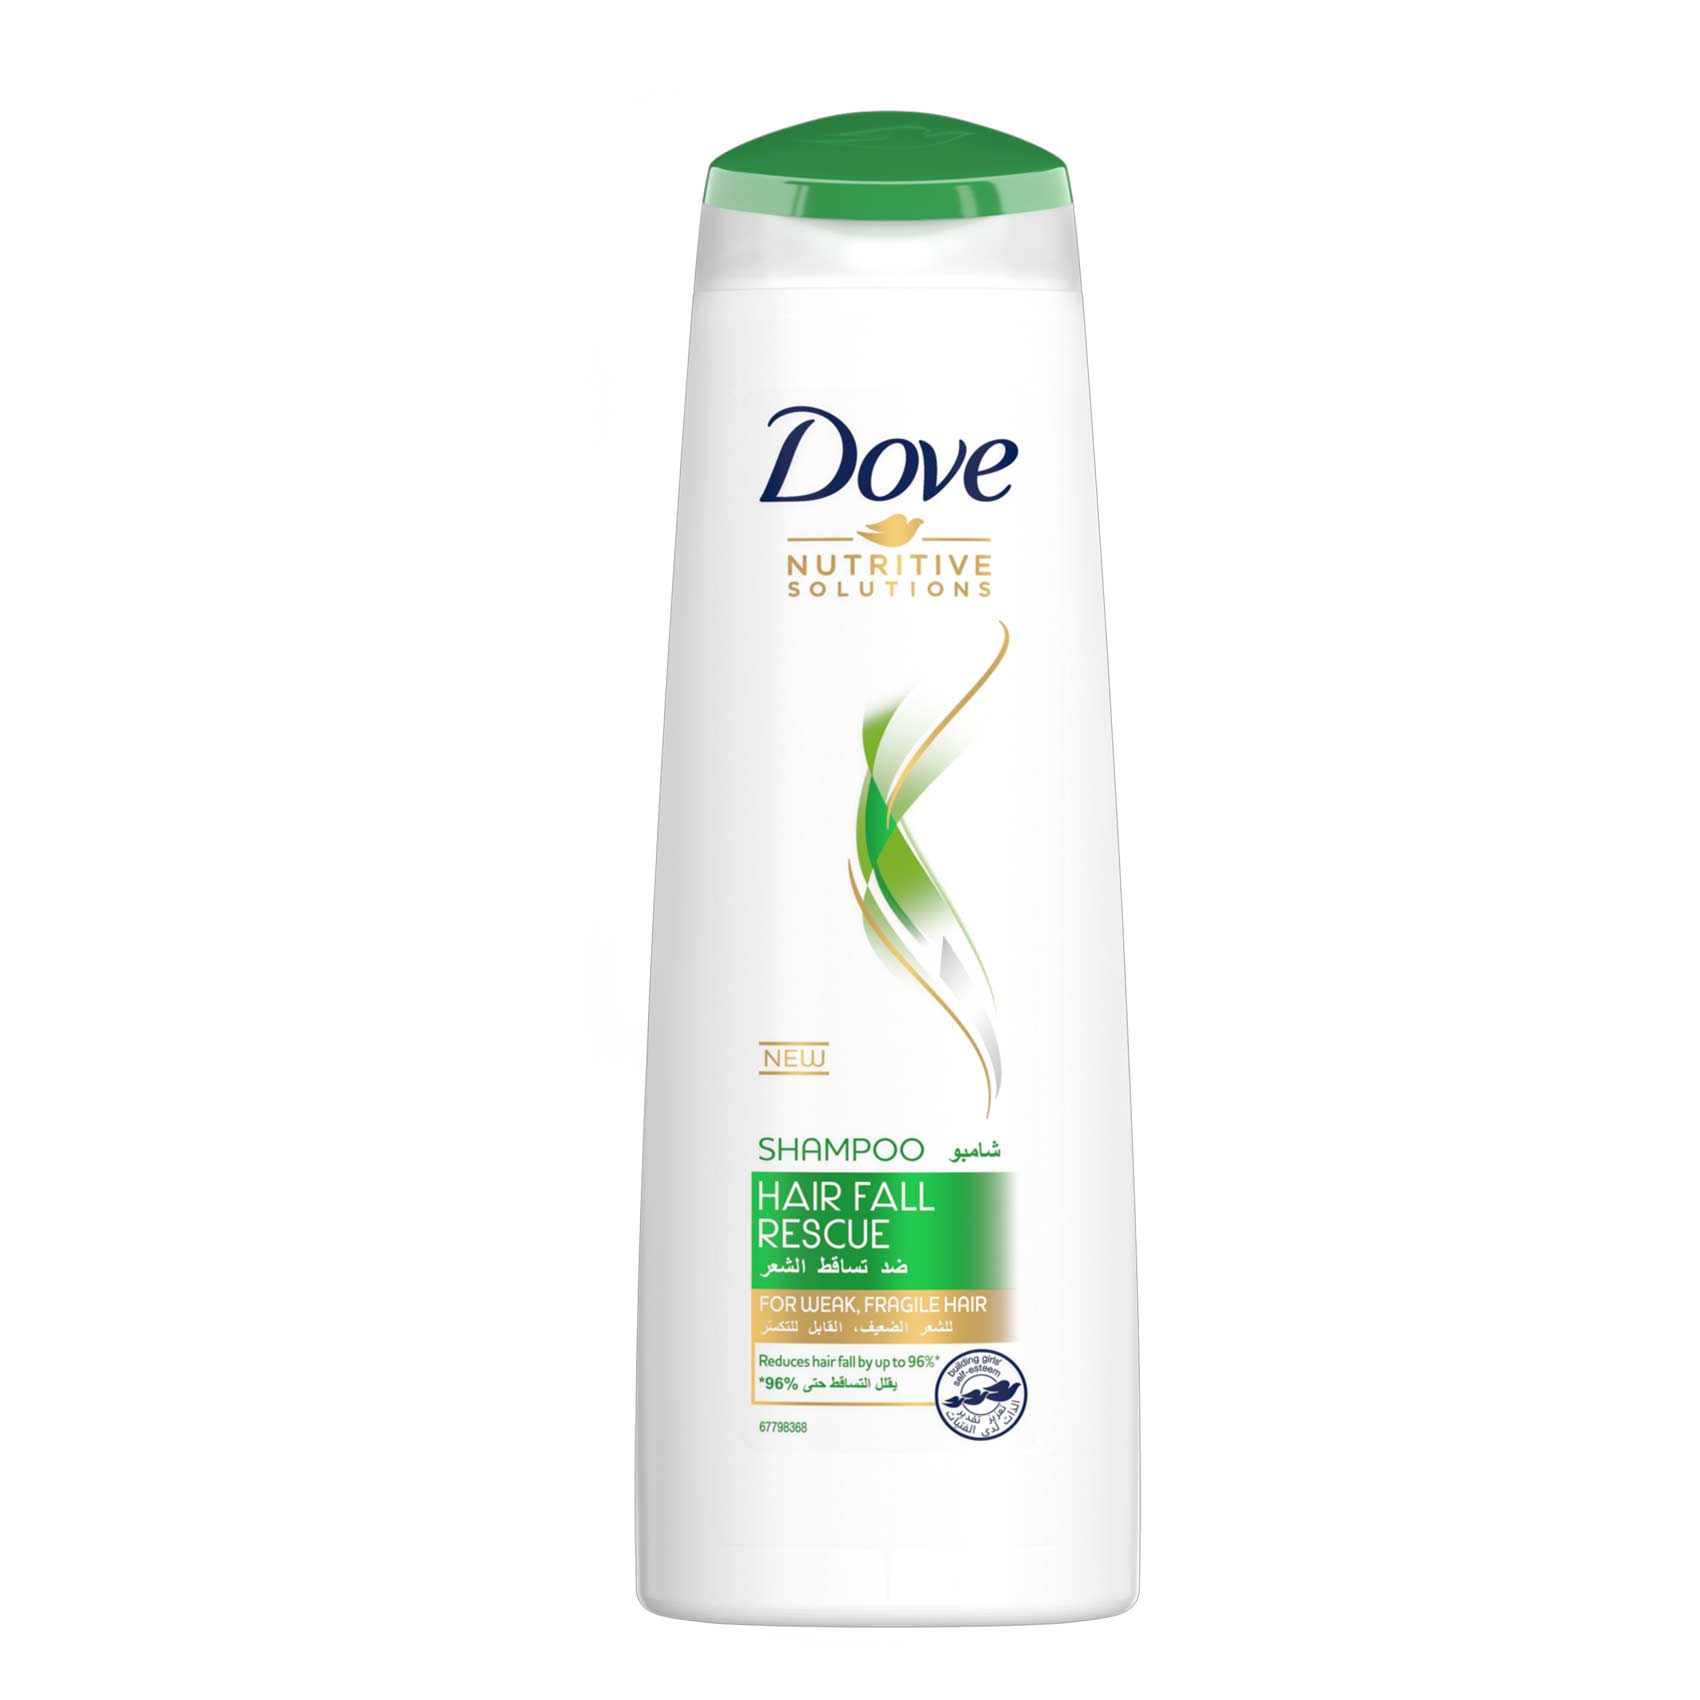 Dove Nutritive Solutions Hair Fall Rescue  Deluxe Moisture Shampoo 400ml